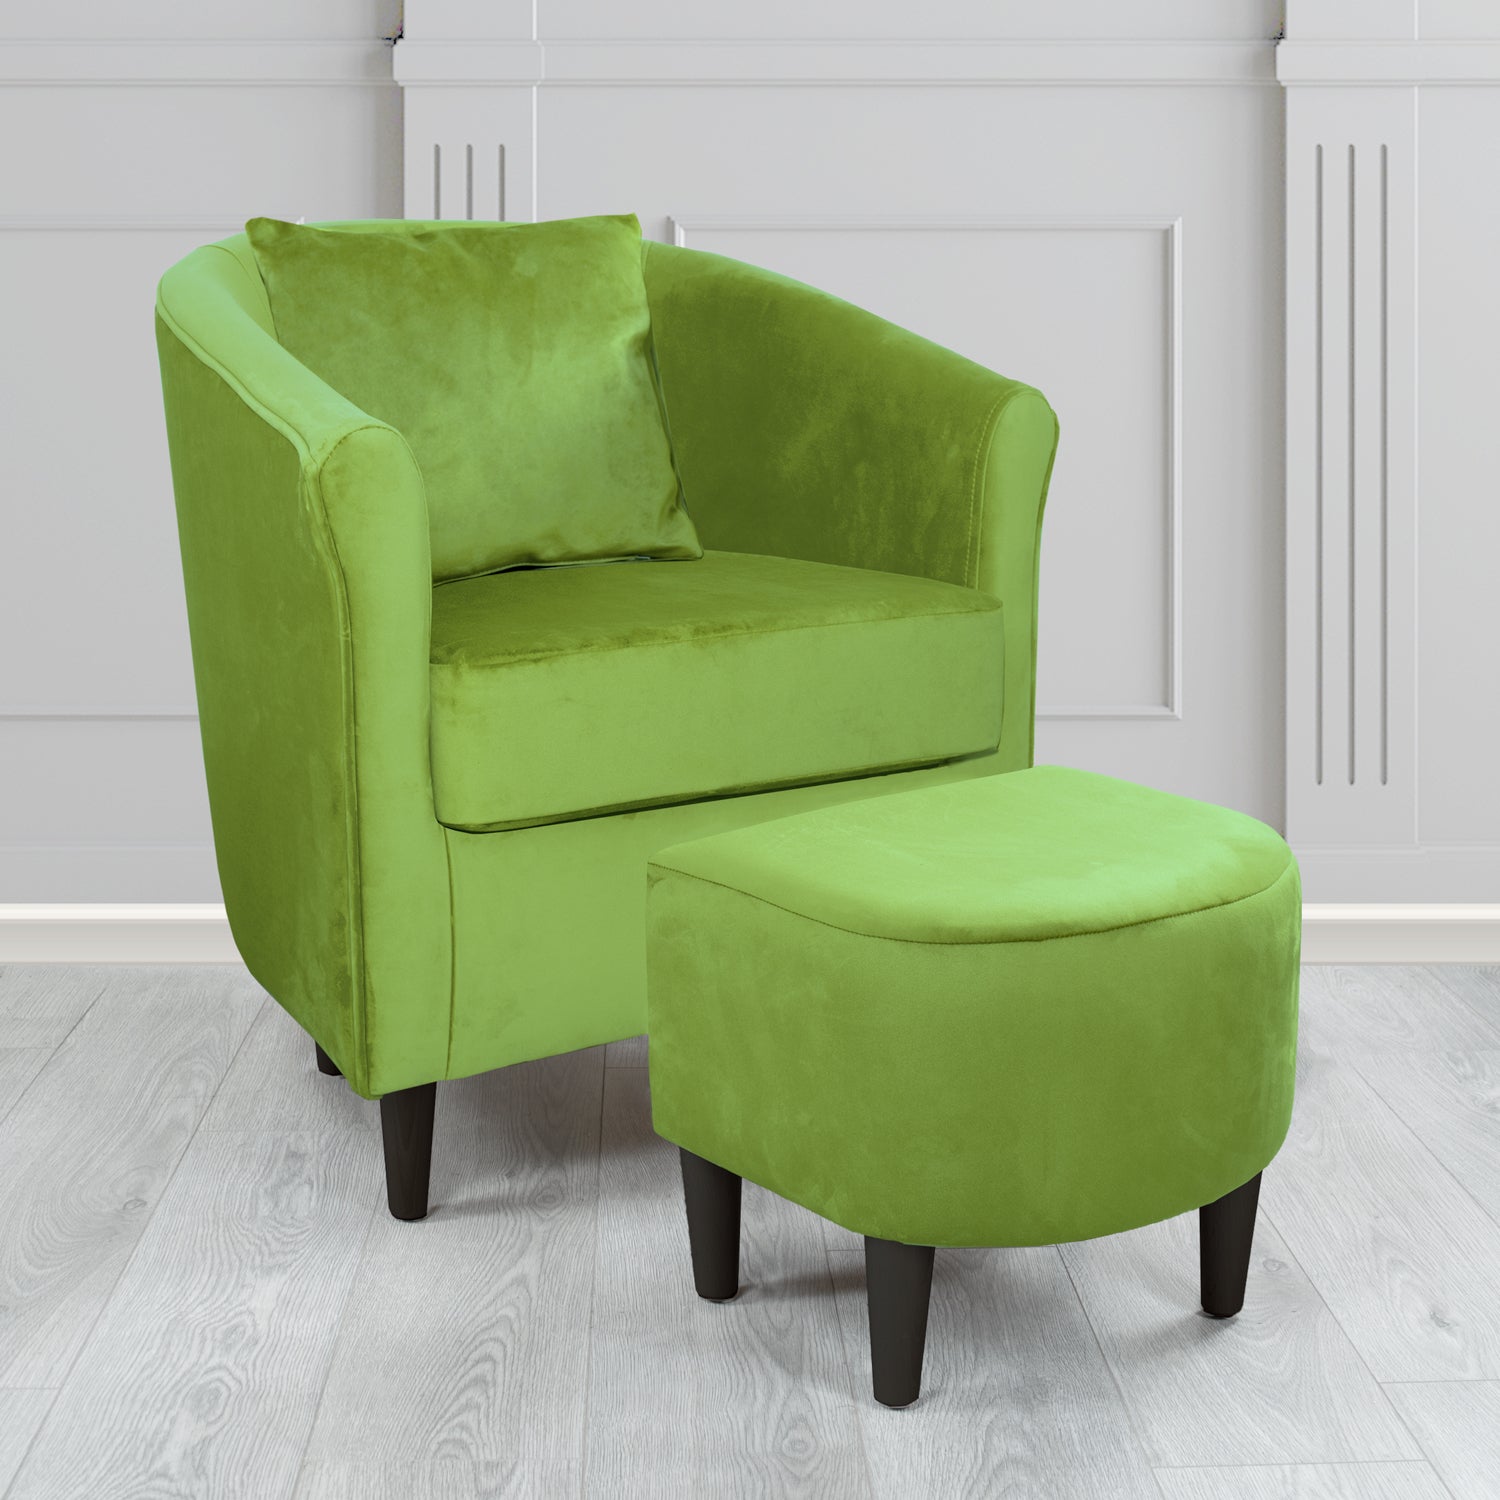 St Tropez Monaco Olive Plush Velvet Fabric Tub Chair & Footstool Set with Scatter Cushion (6606247198762)